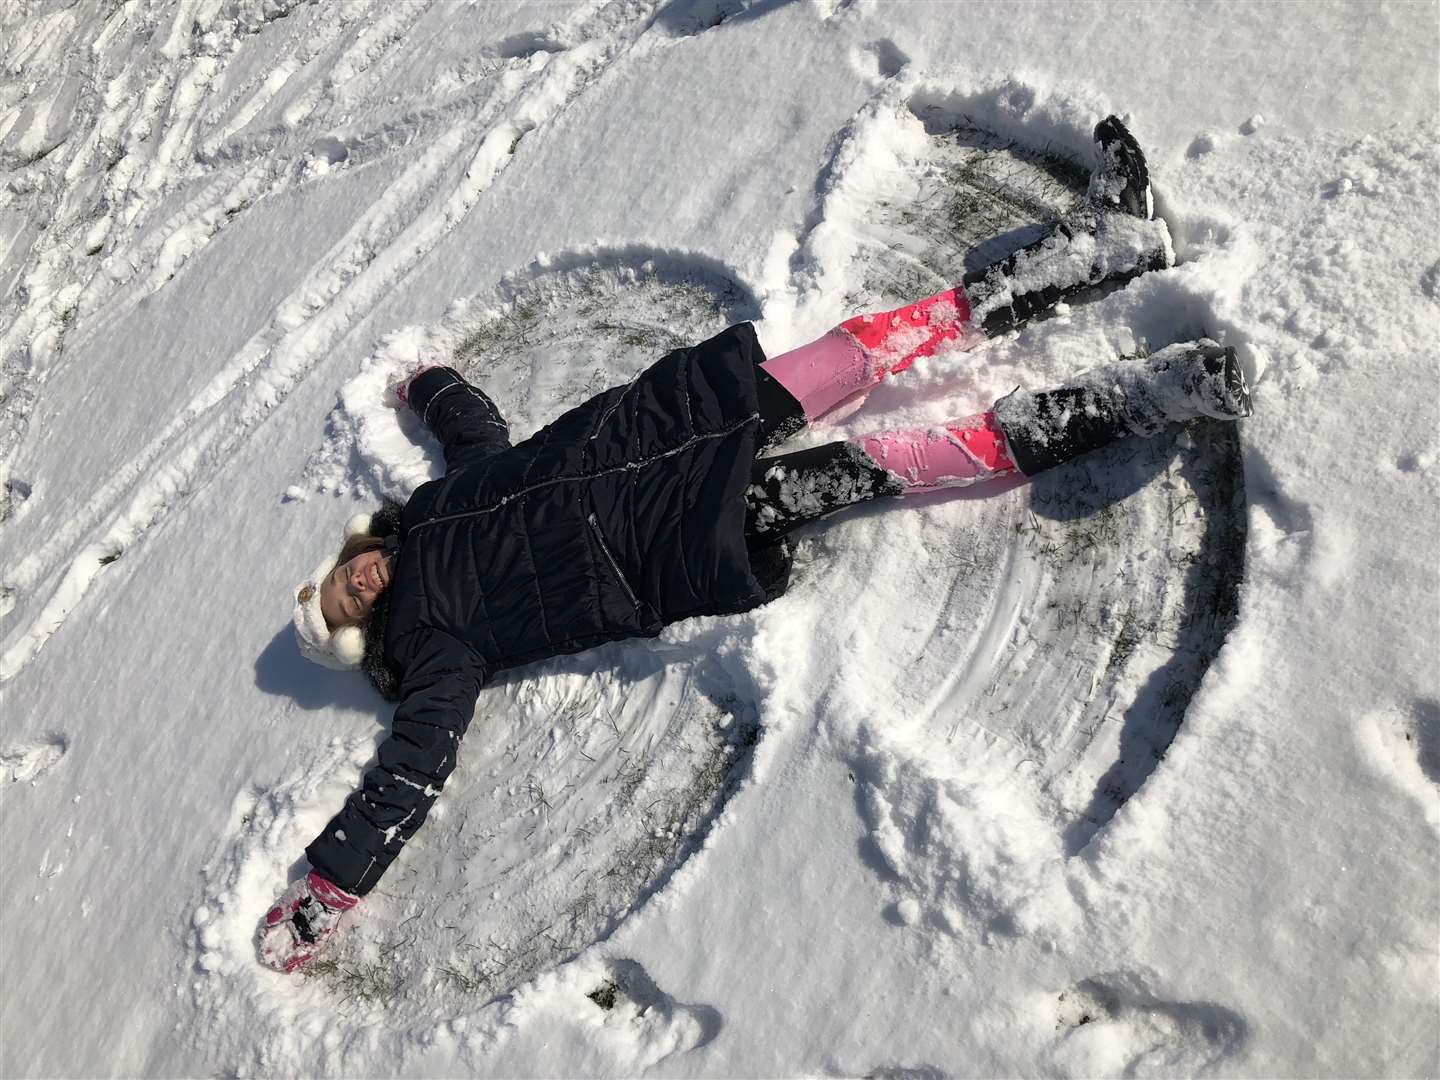 Tamsyn McArdle, 11, at Dartford Park, enjoying the snow from the Beast from the East. Picture: Amie McArdle